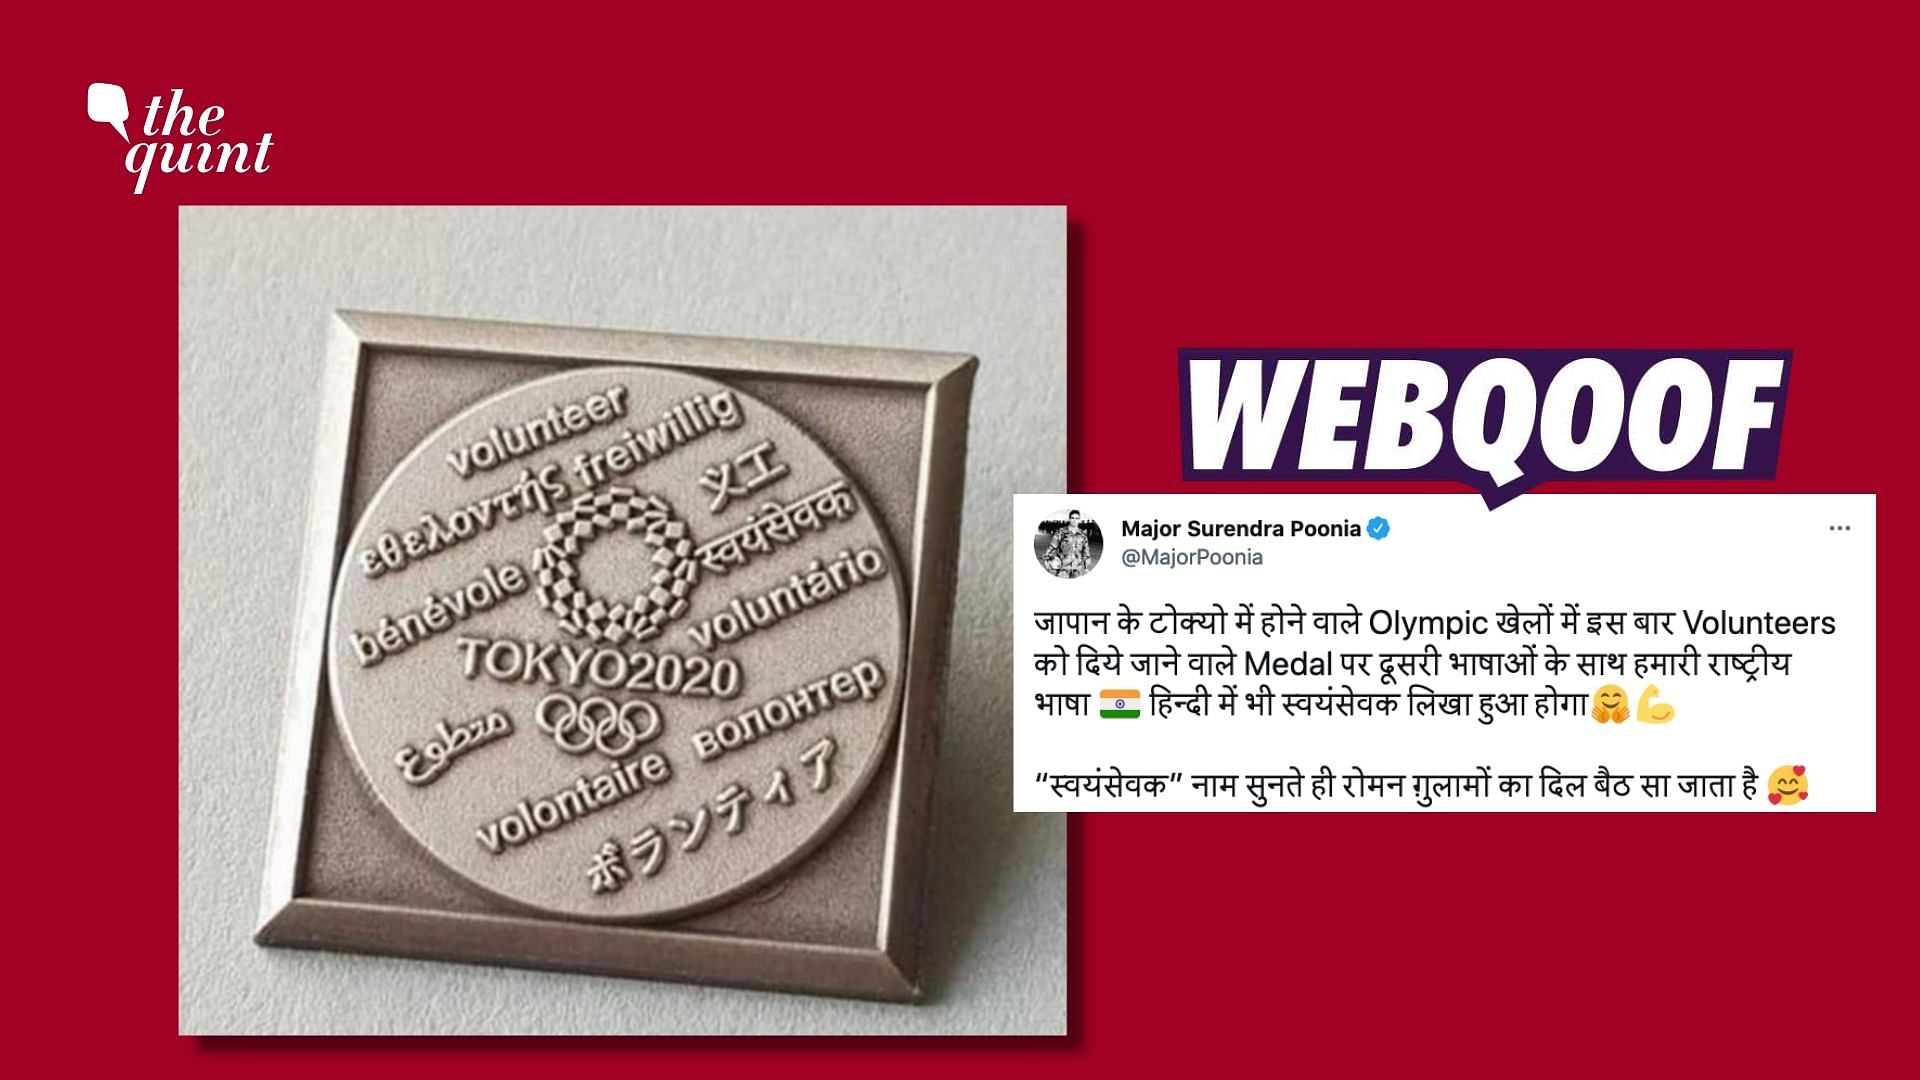 <div class="paragraphs"><p>A product available on an e-commerce platform was used to falsely claim that it's the medal that volunteers are getting at 2020 Tokyo Olympics.</p></div>